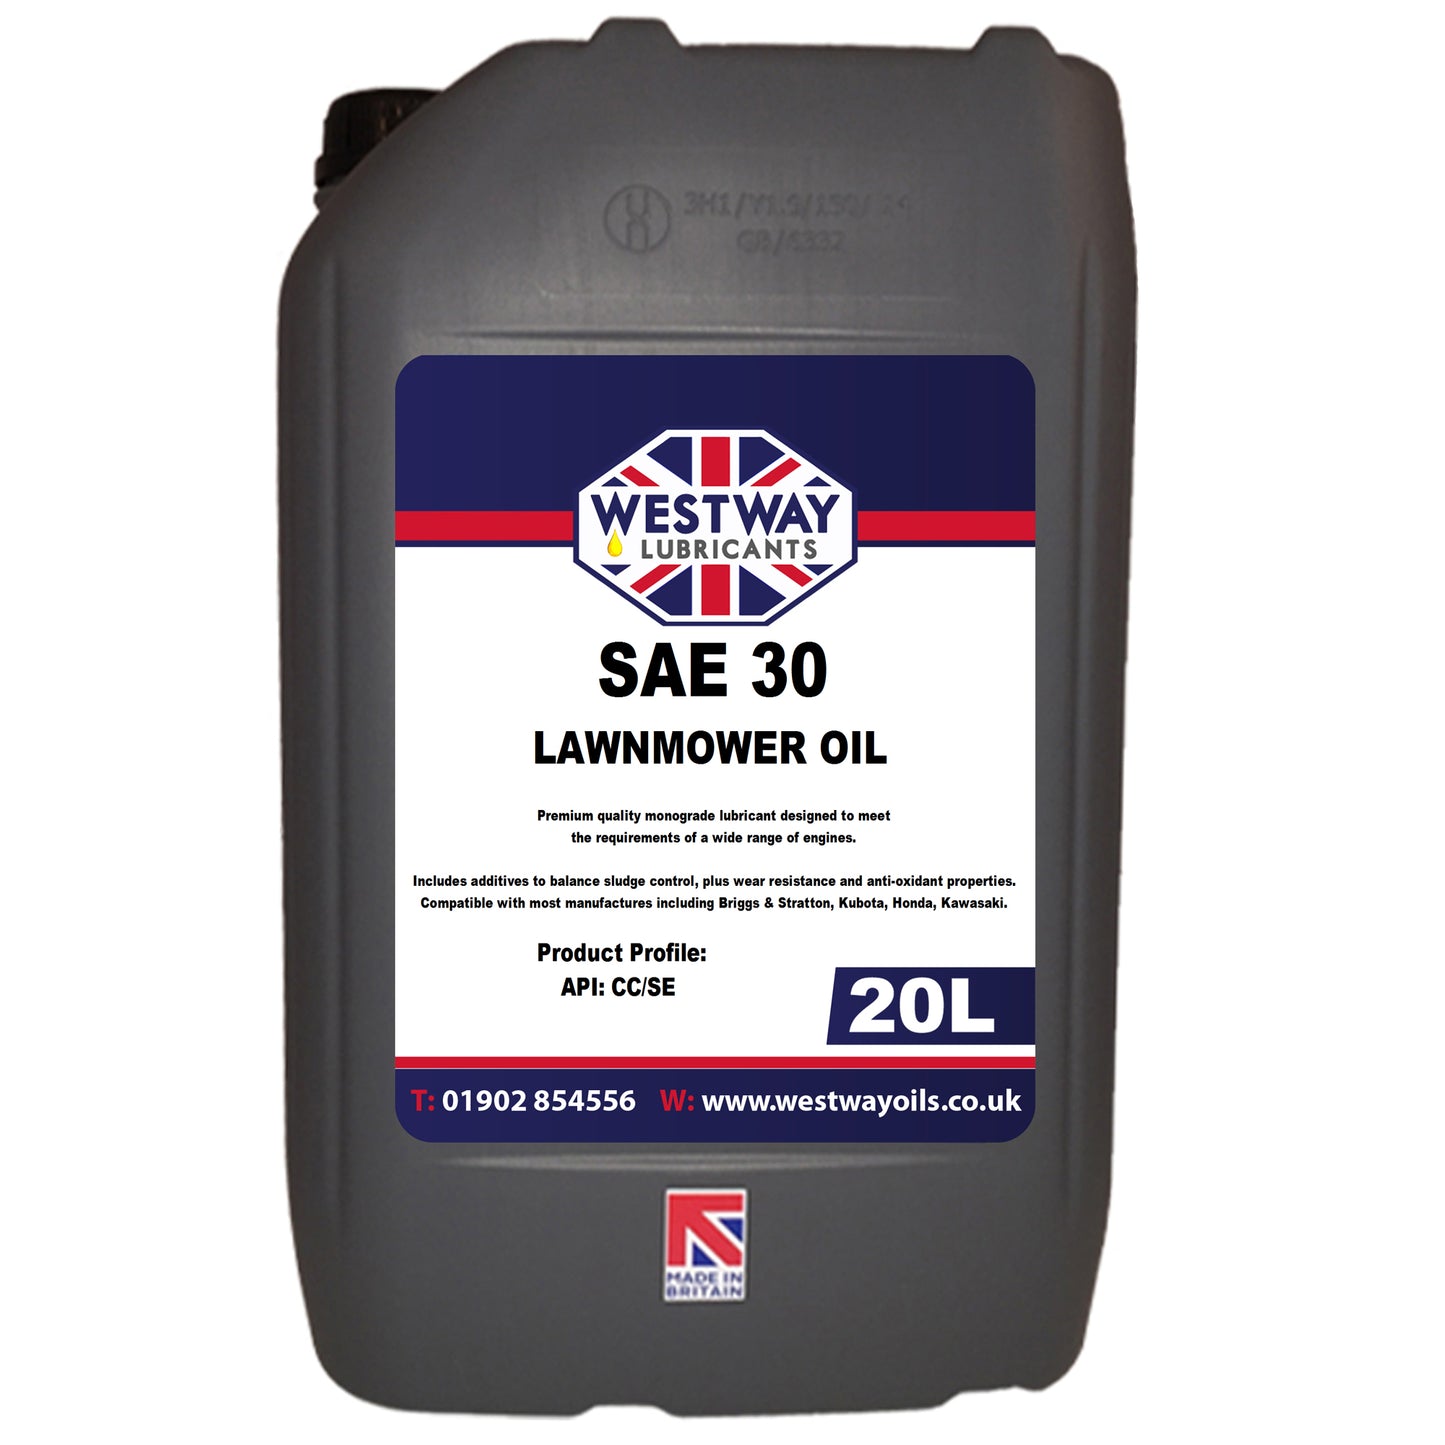 SAE 30 Lawnmower Oil Mineral Based